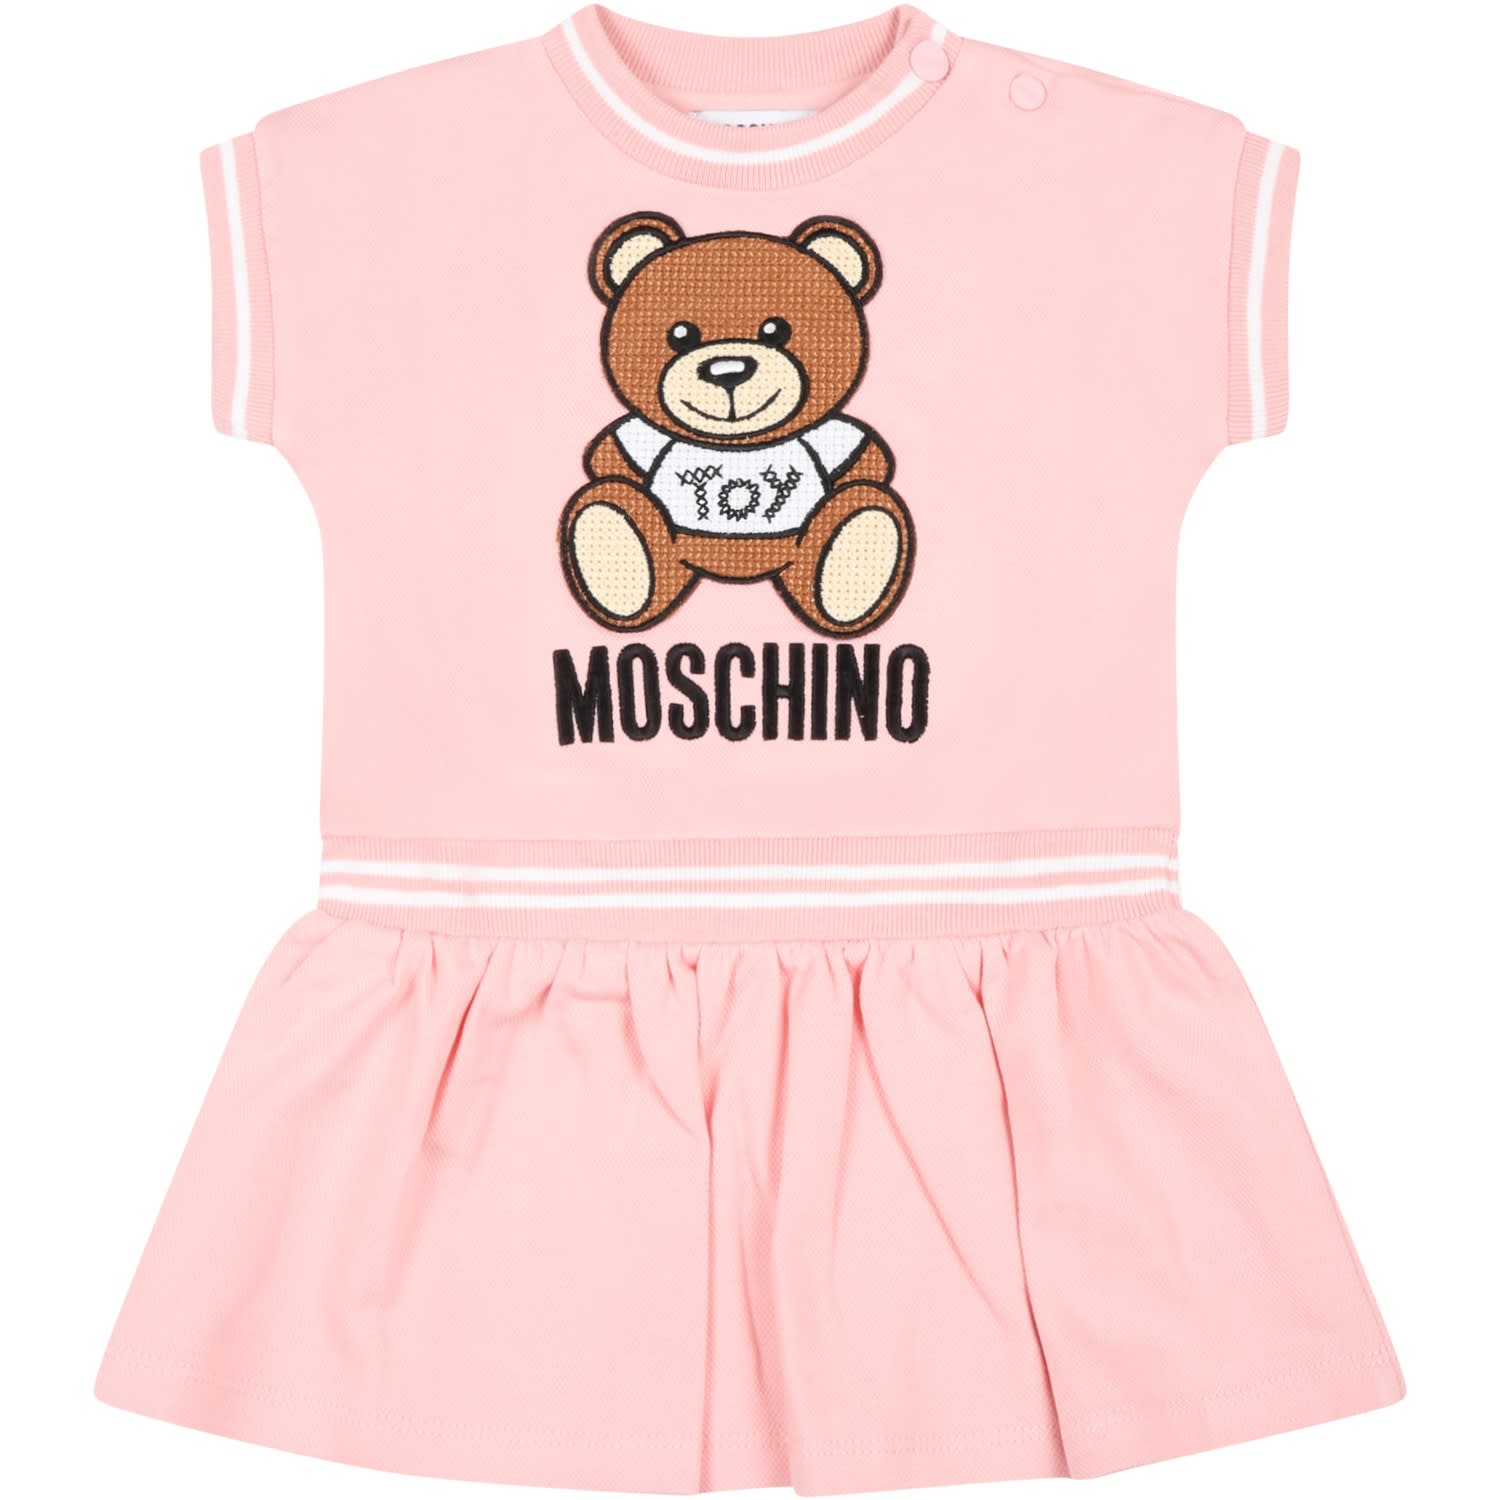 Moschino Pink Dress For Baby Girl With Teddy Bear